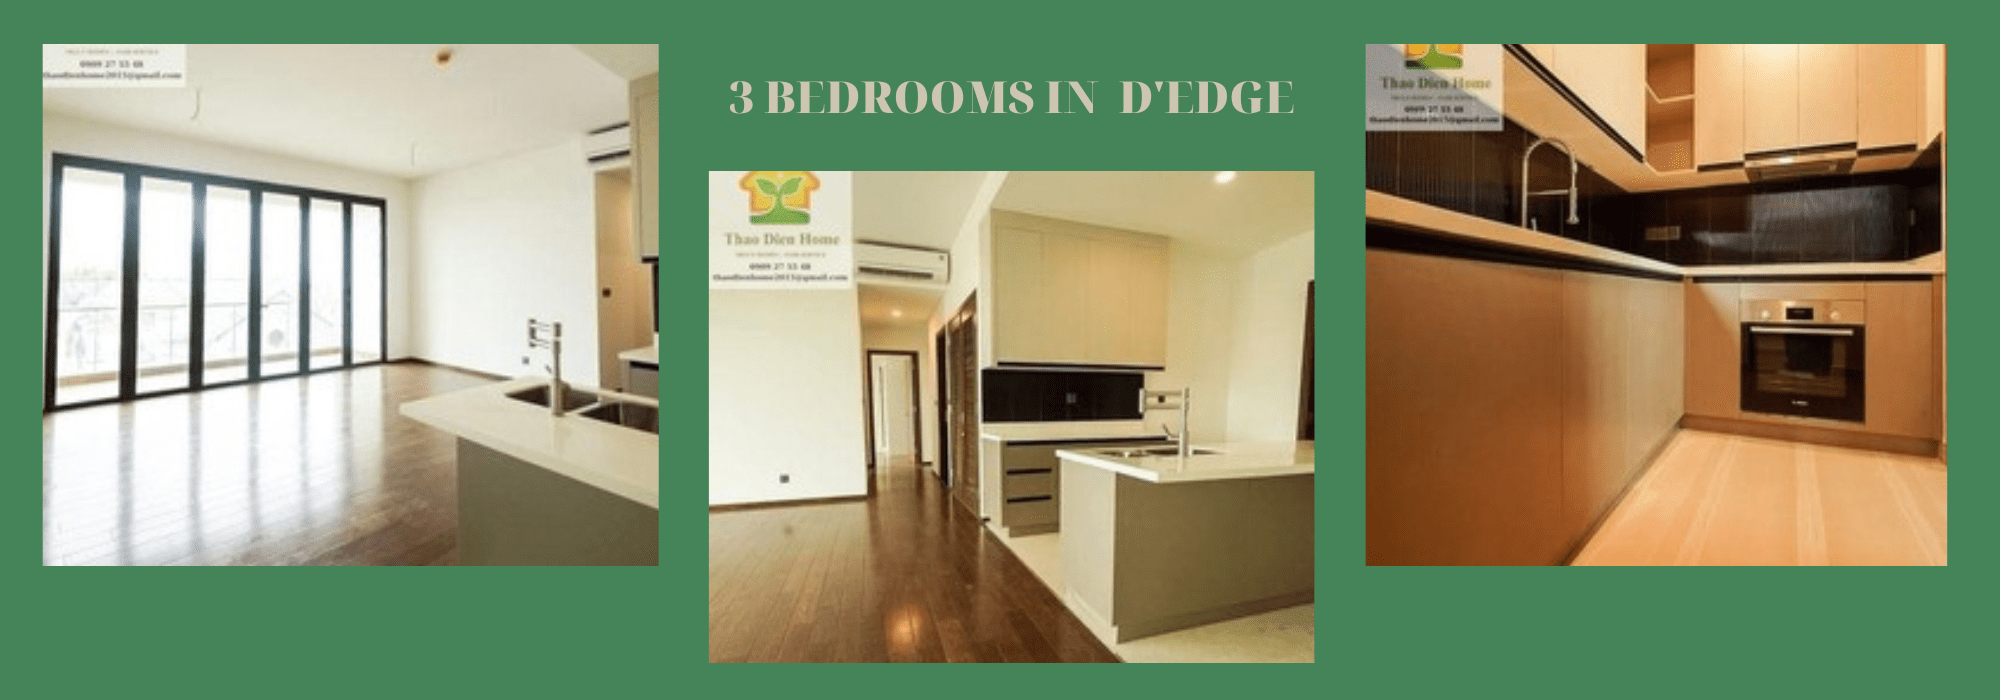 Decorate Your Dreamy Home In This Unfurnished Apartment At D’edge Thao Dien